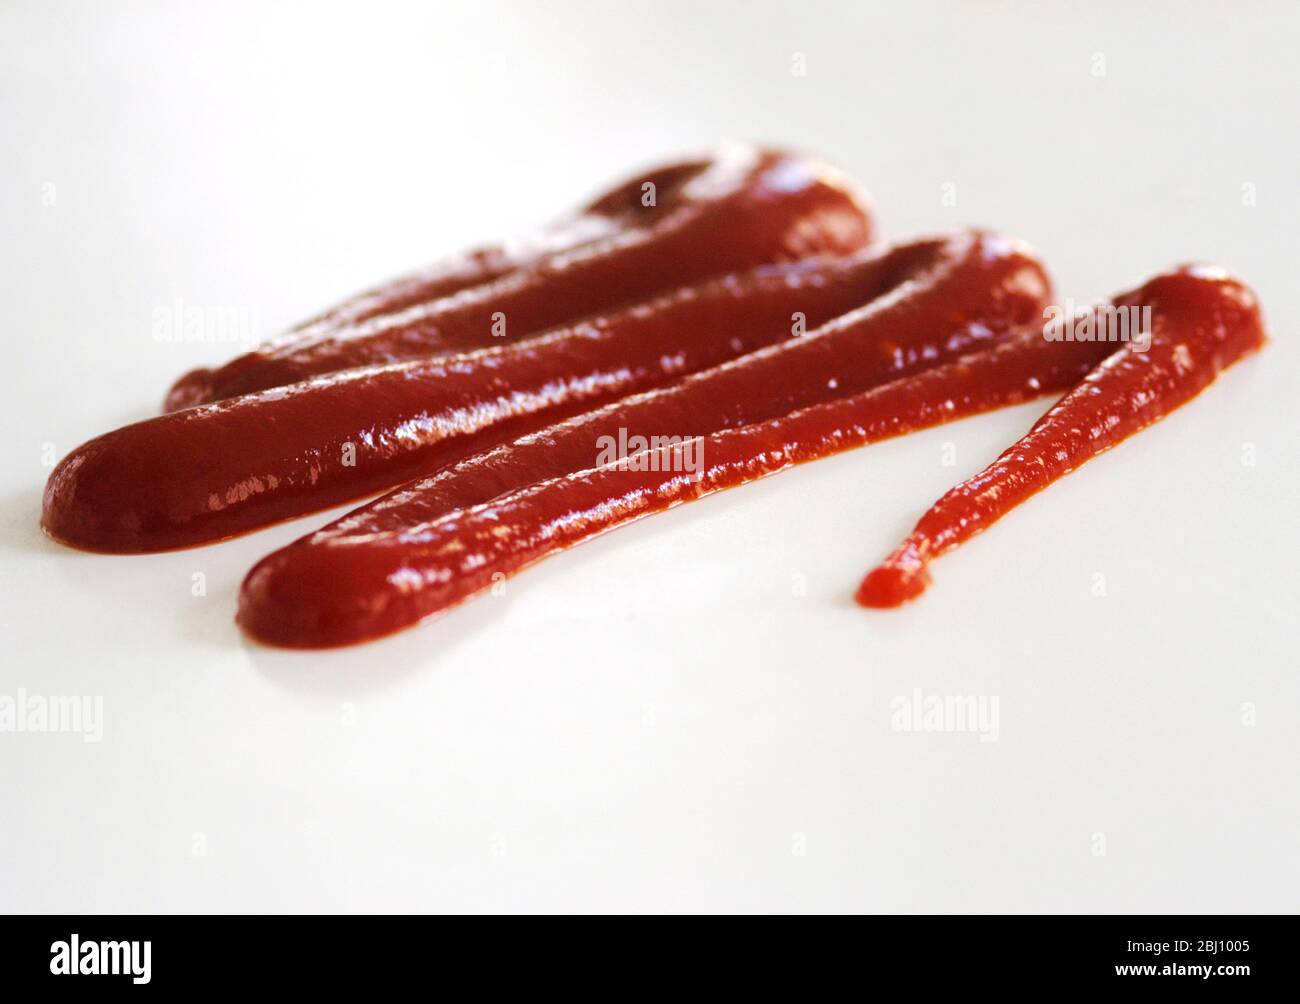 Squiggle of tomato ketchup squeezed out of squeezy bottle on white background - Stock Photo